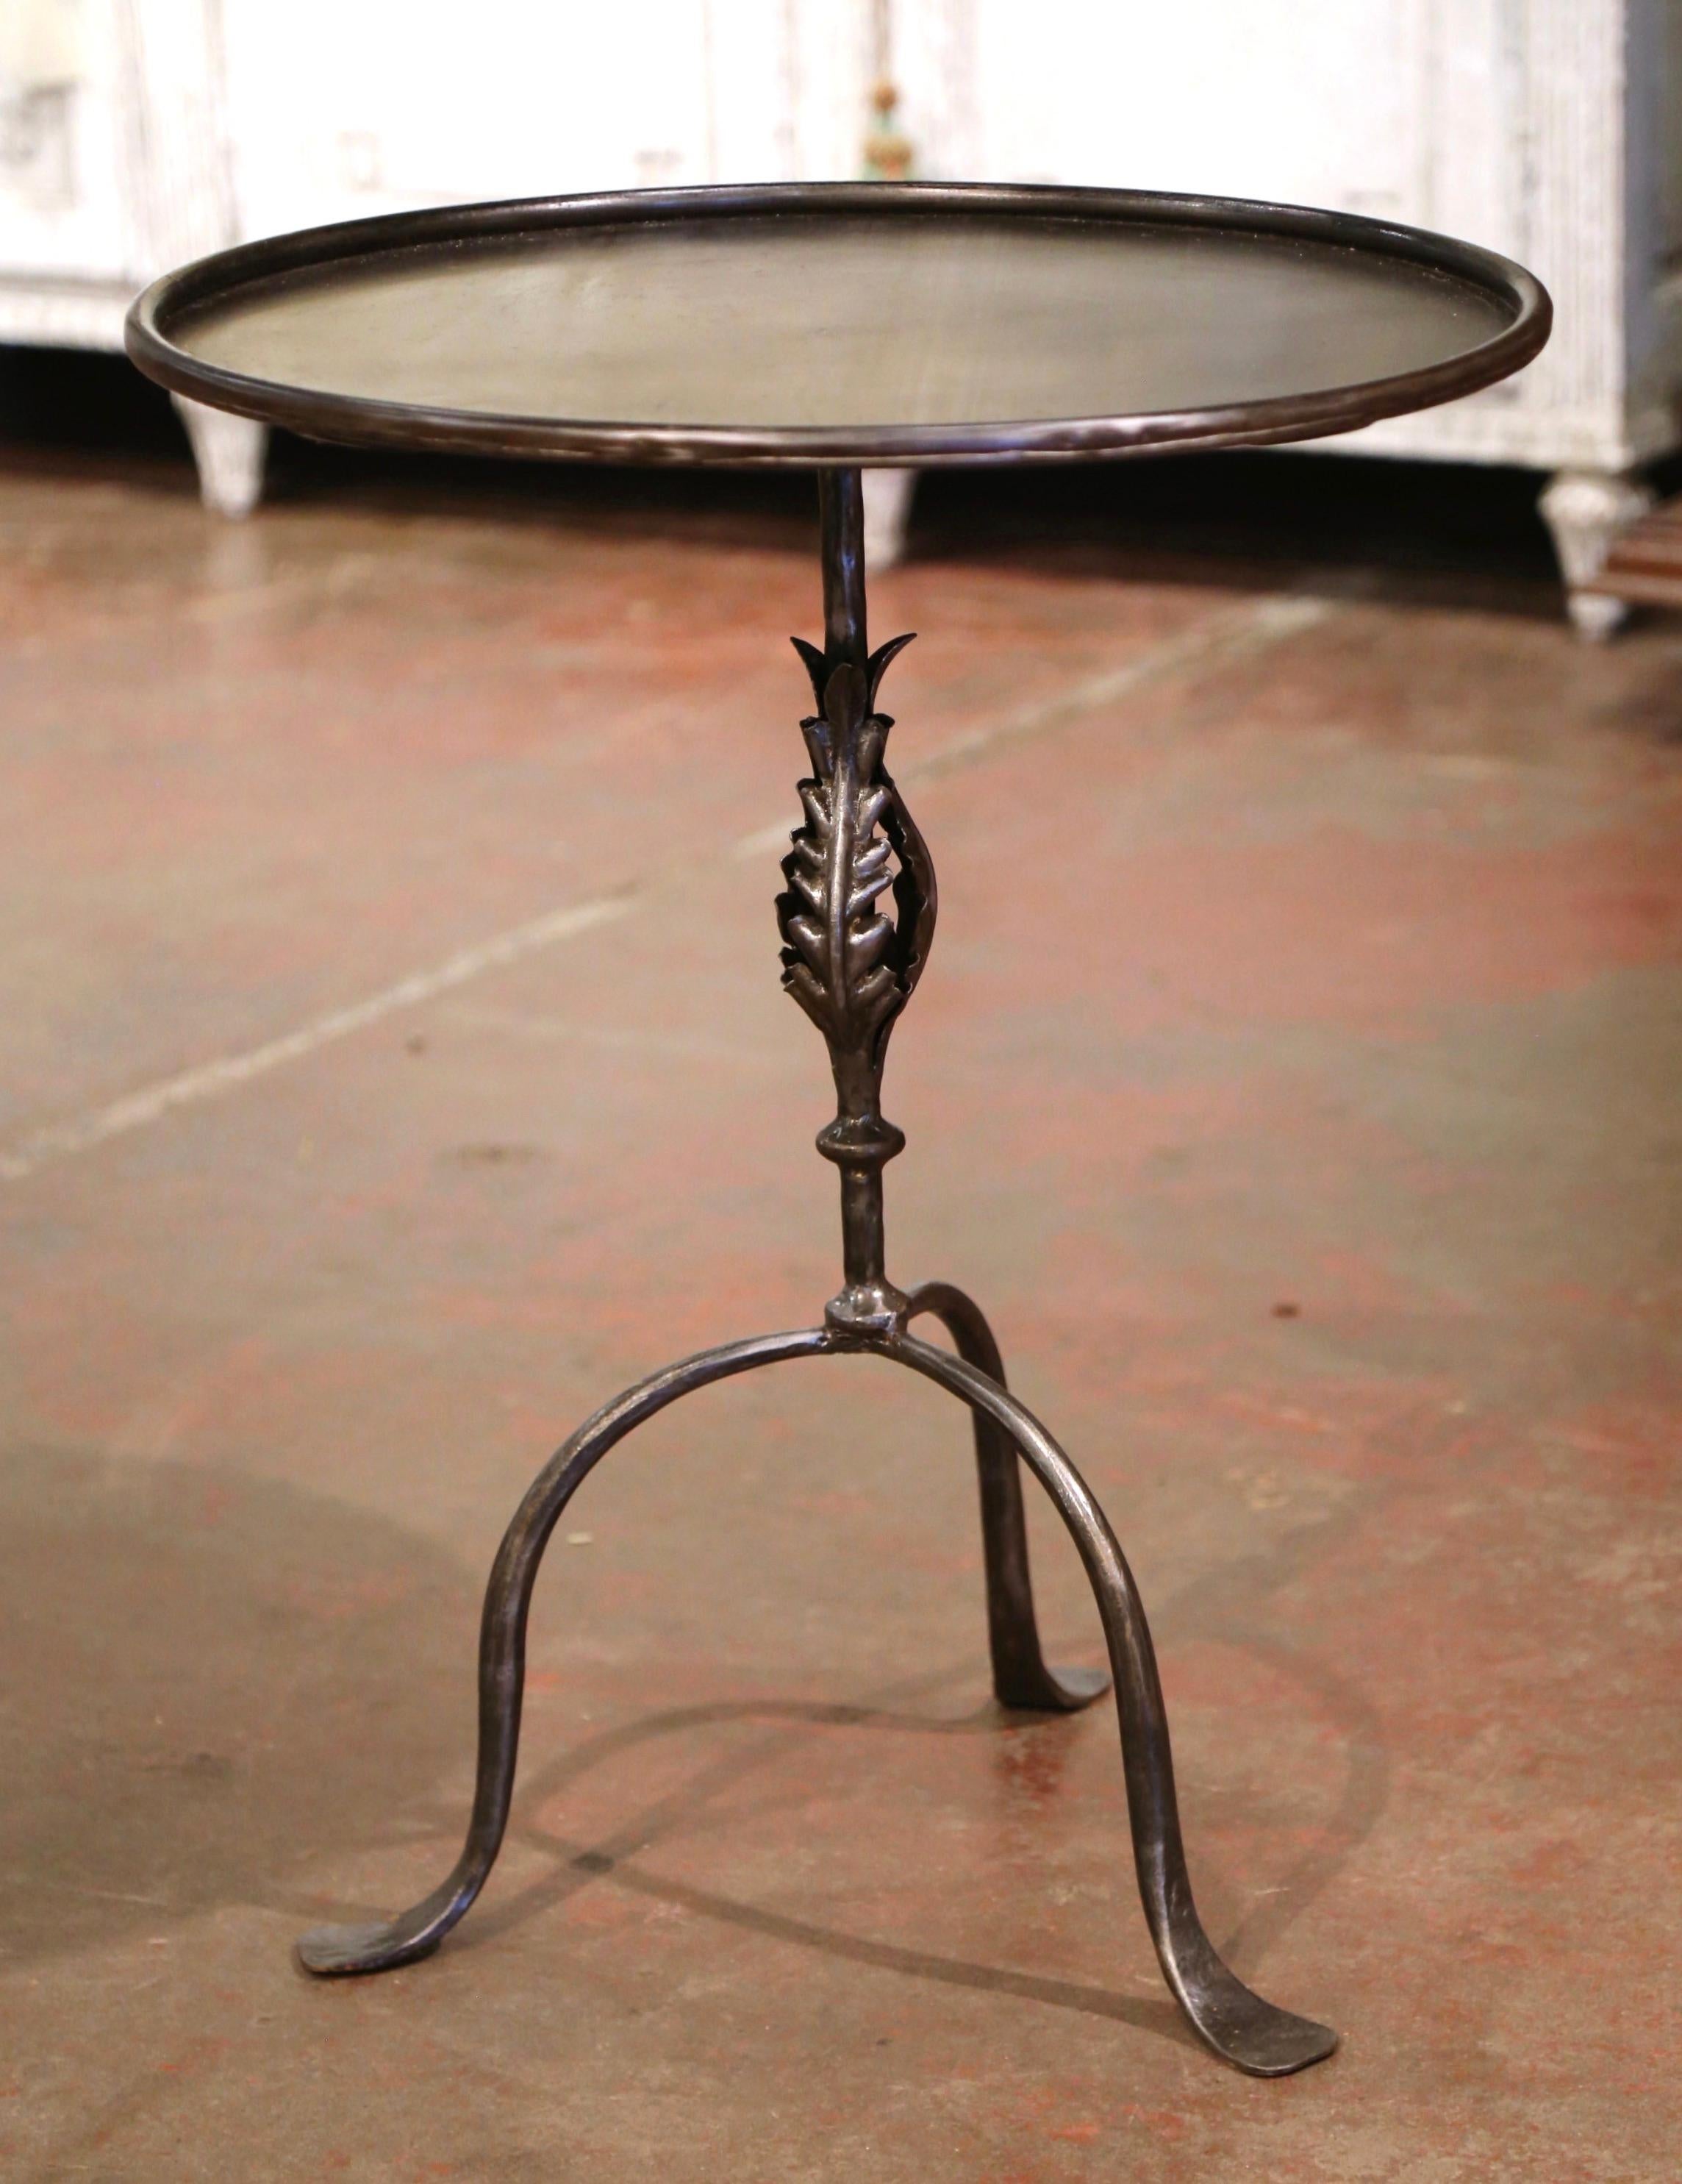 This elegant, antique pedestal table was crafted in Southern France, circa 1920. The intricate martini table features a central pedestal stem embellished with acanthus leaf decor over three scrolled legs ending with small feet. The serving table is